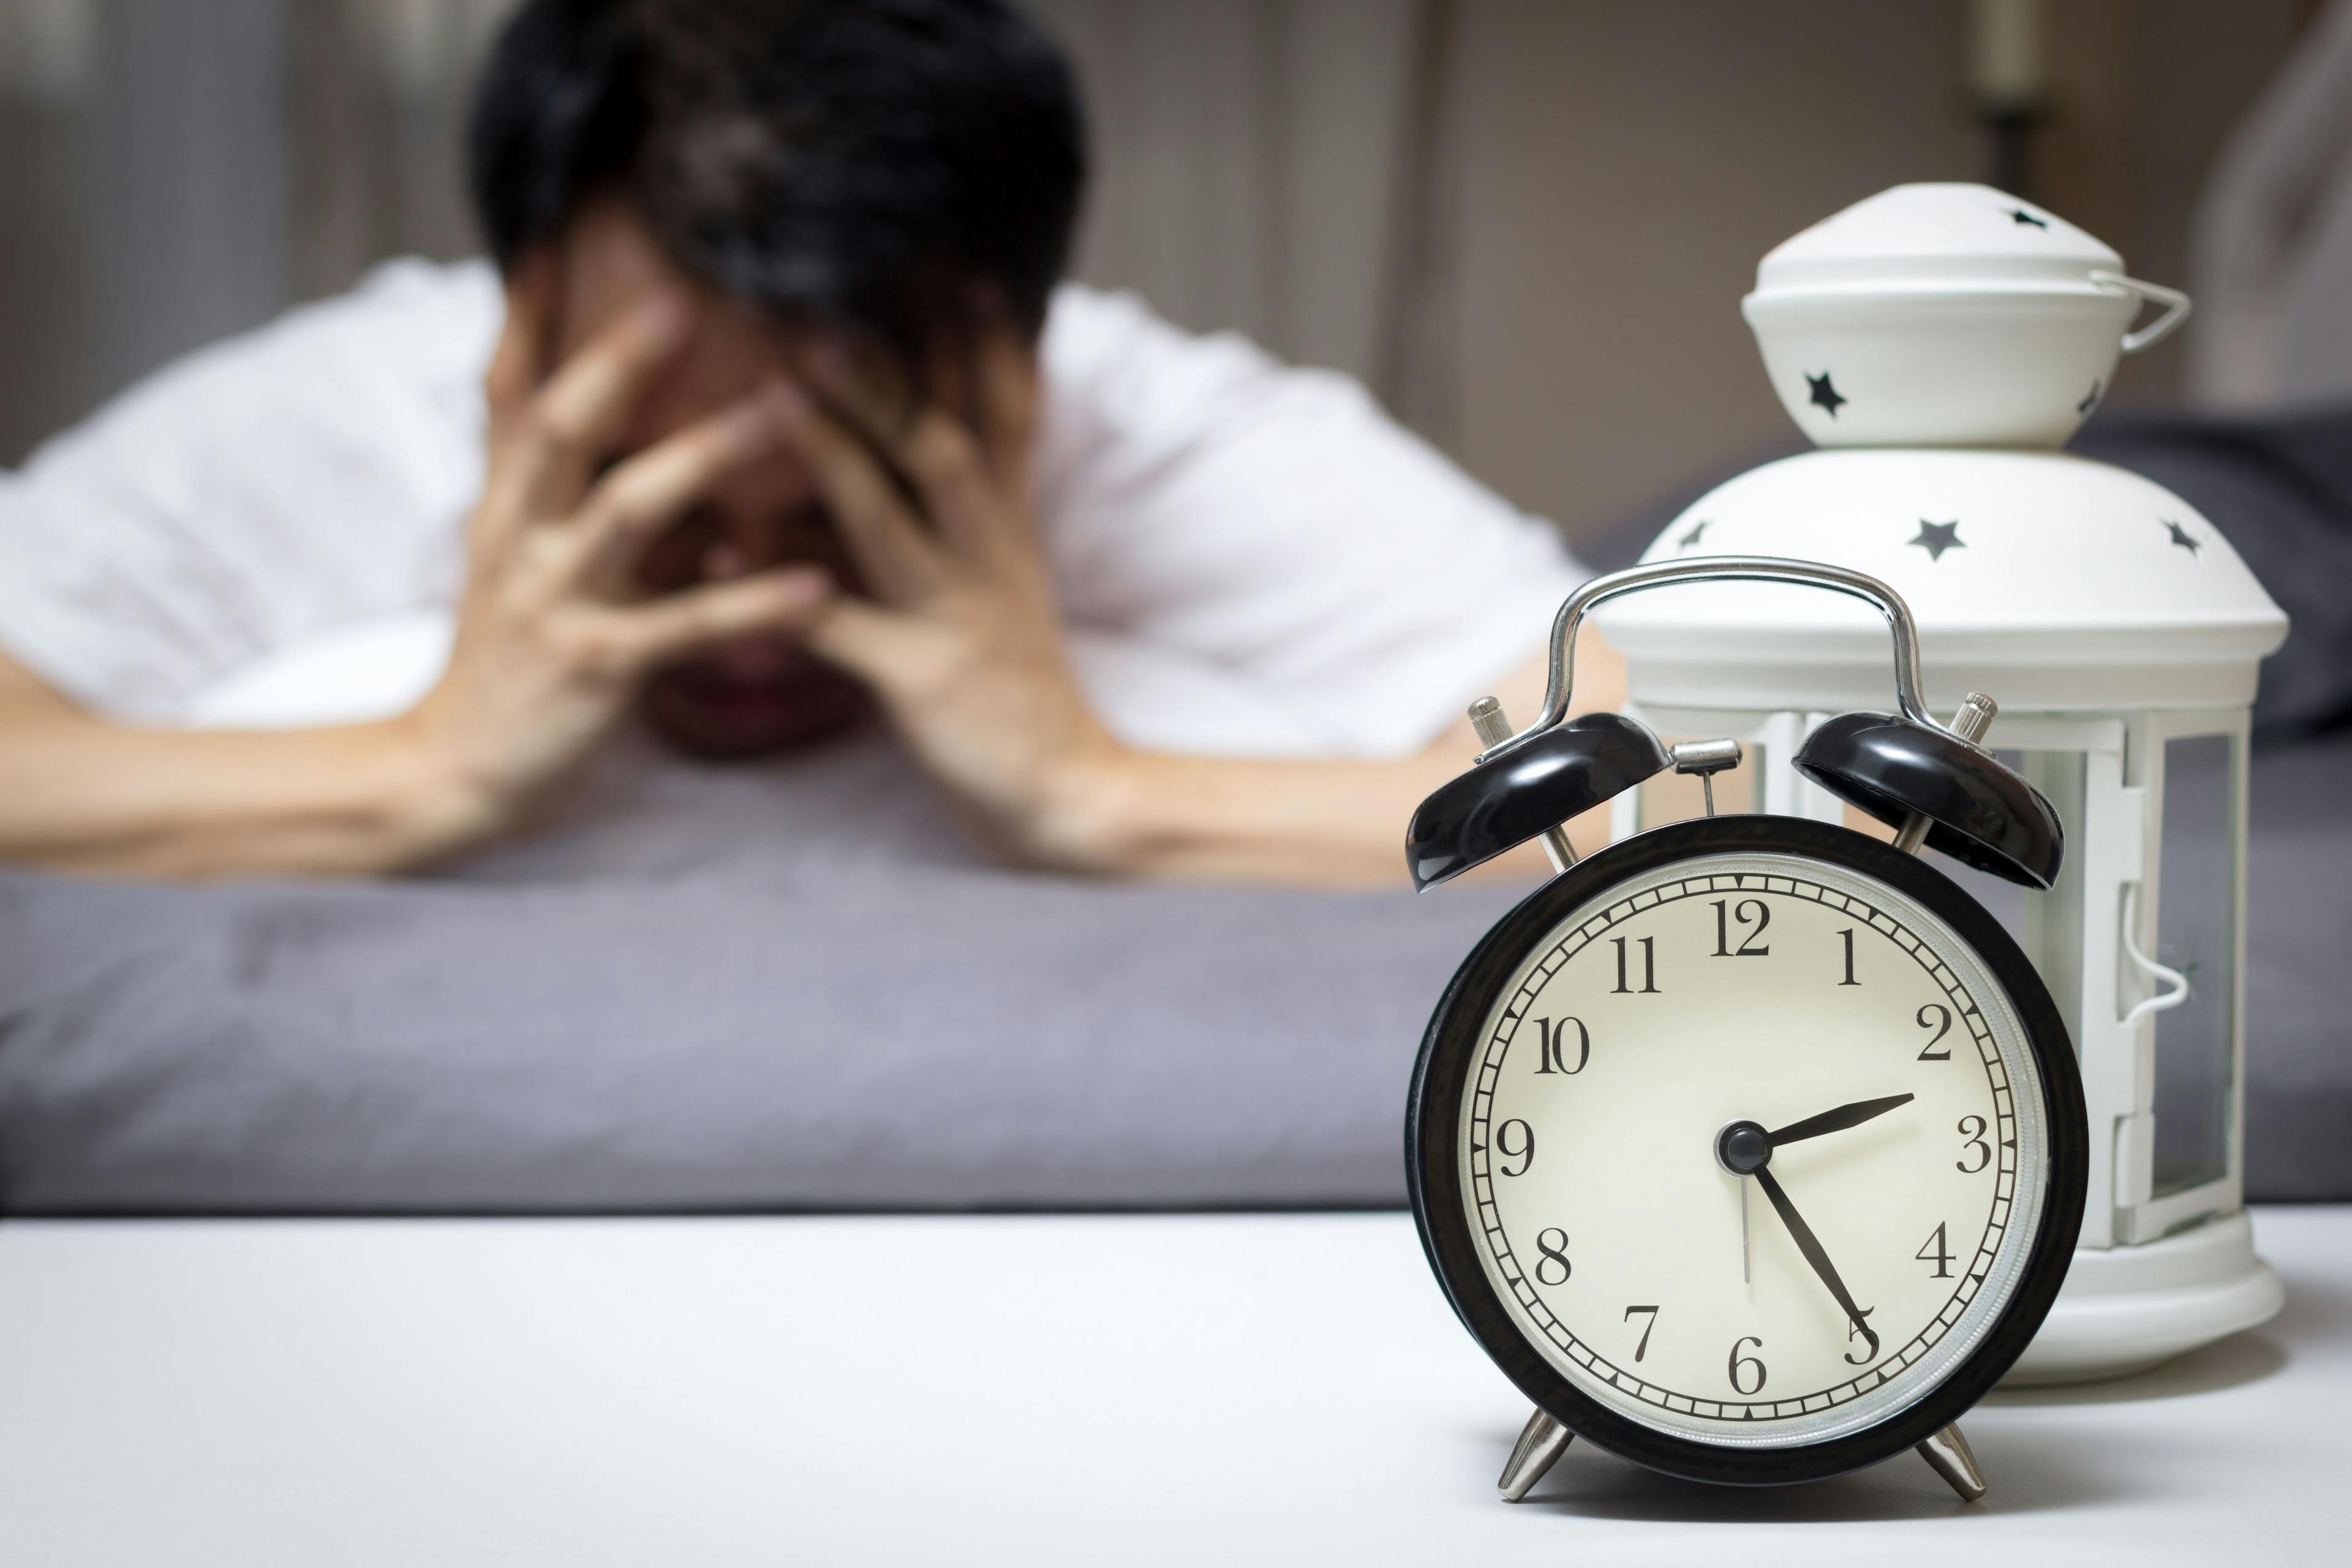 asian man in bed suffering insomnia and sleep disorder thinking about his problem at night. Image Credit: Adobe Stock Images/princeoflove